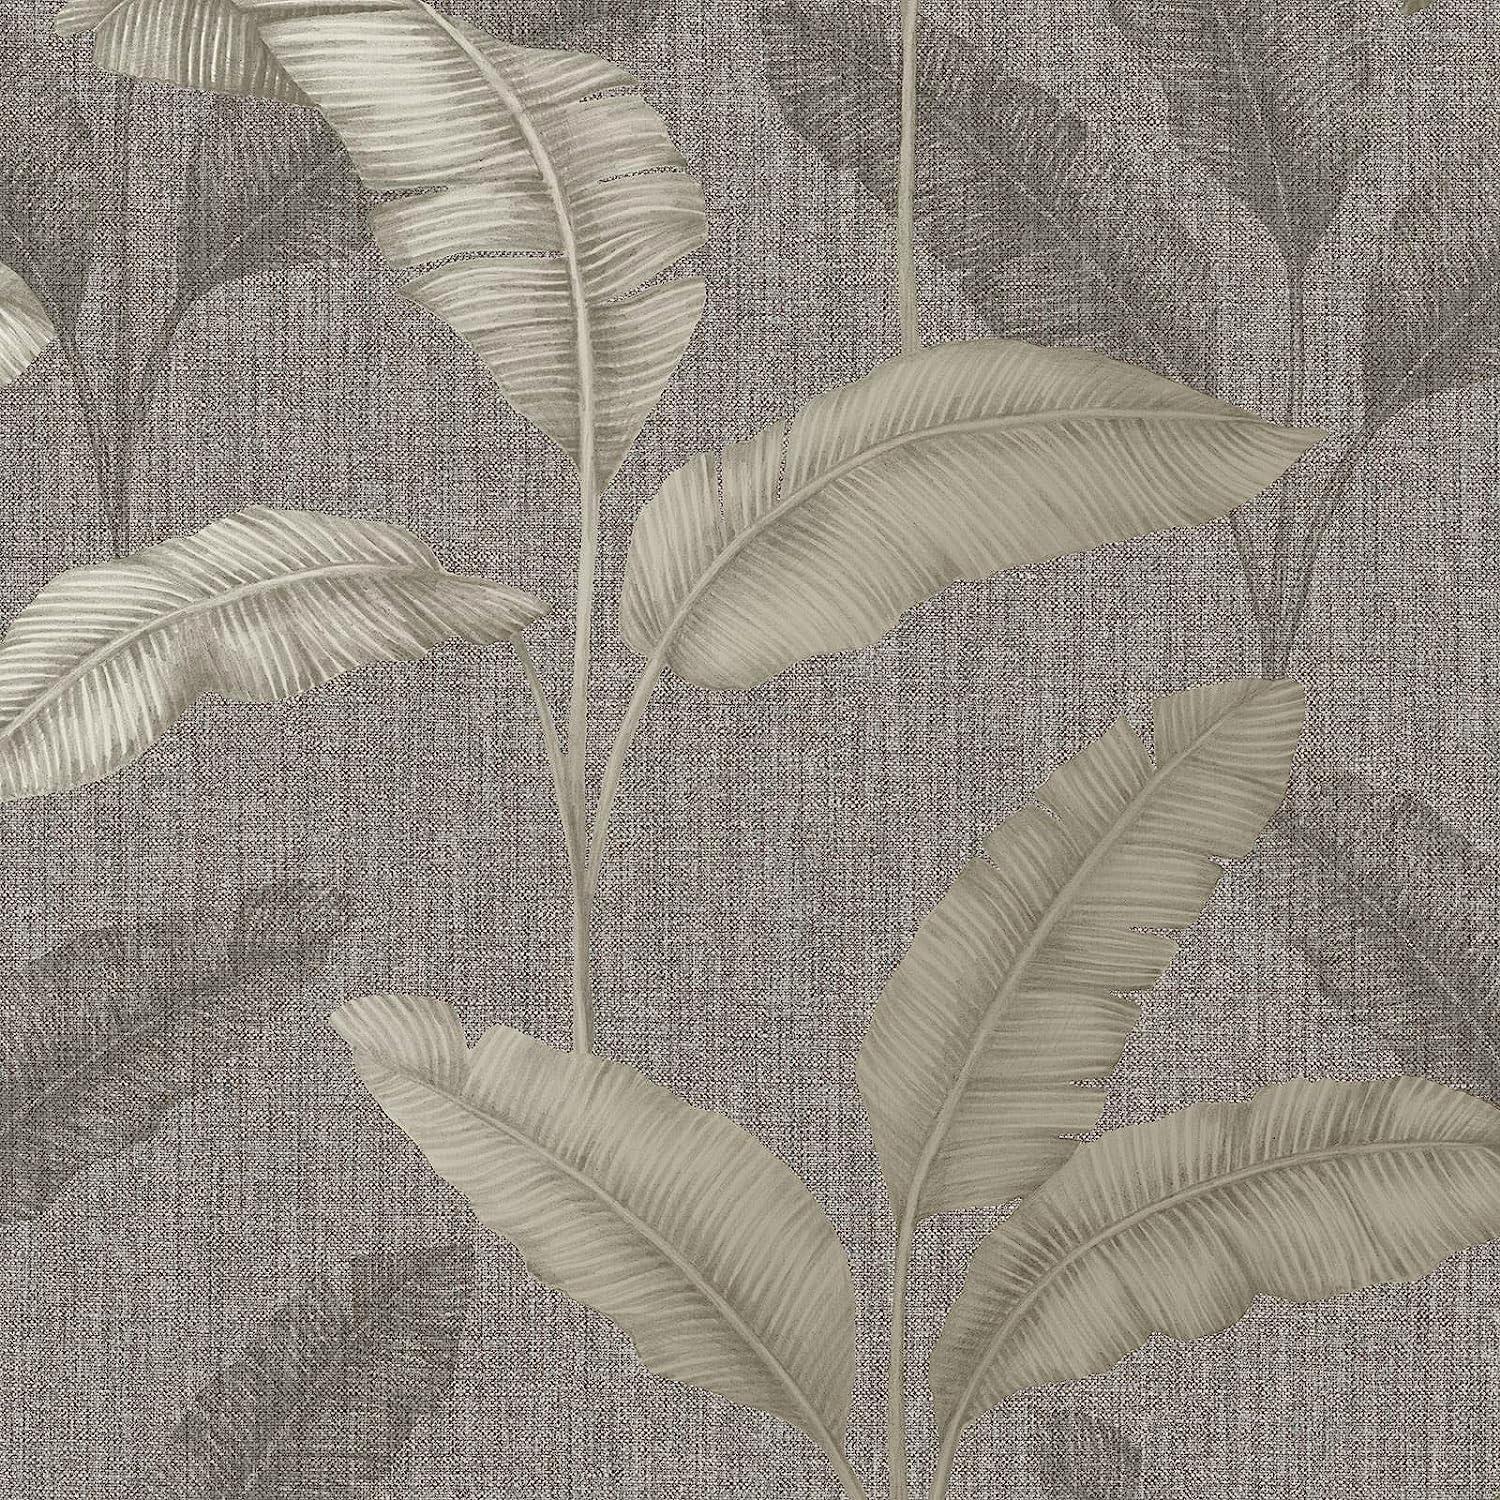 RASCH (U.K) Limited Amara Palm Wallpaper - Modern Wallpaper for Living Room, Bedroom, Fireplace - Decorative Luxury Tropical Wall Paper with Dusky Metallic Tone (Grey/Gold)